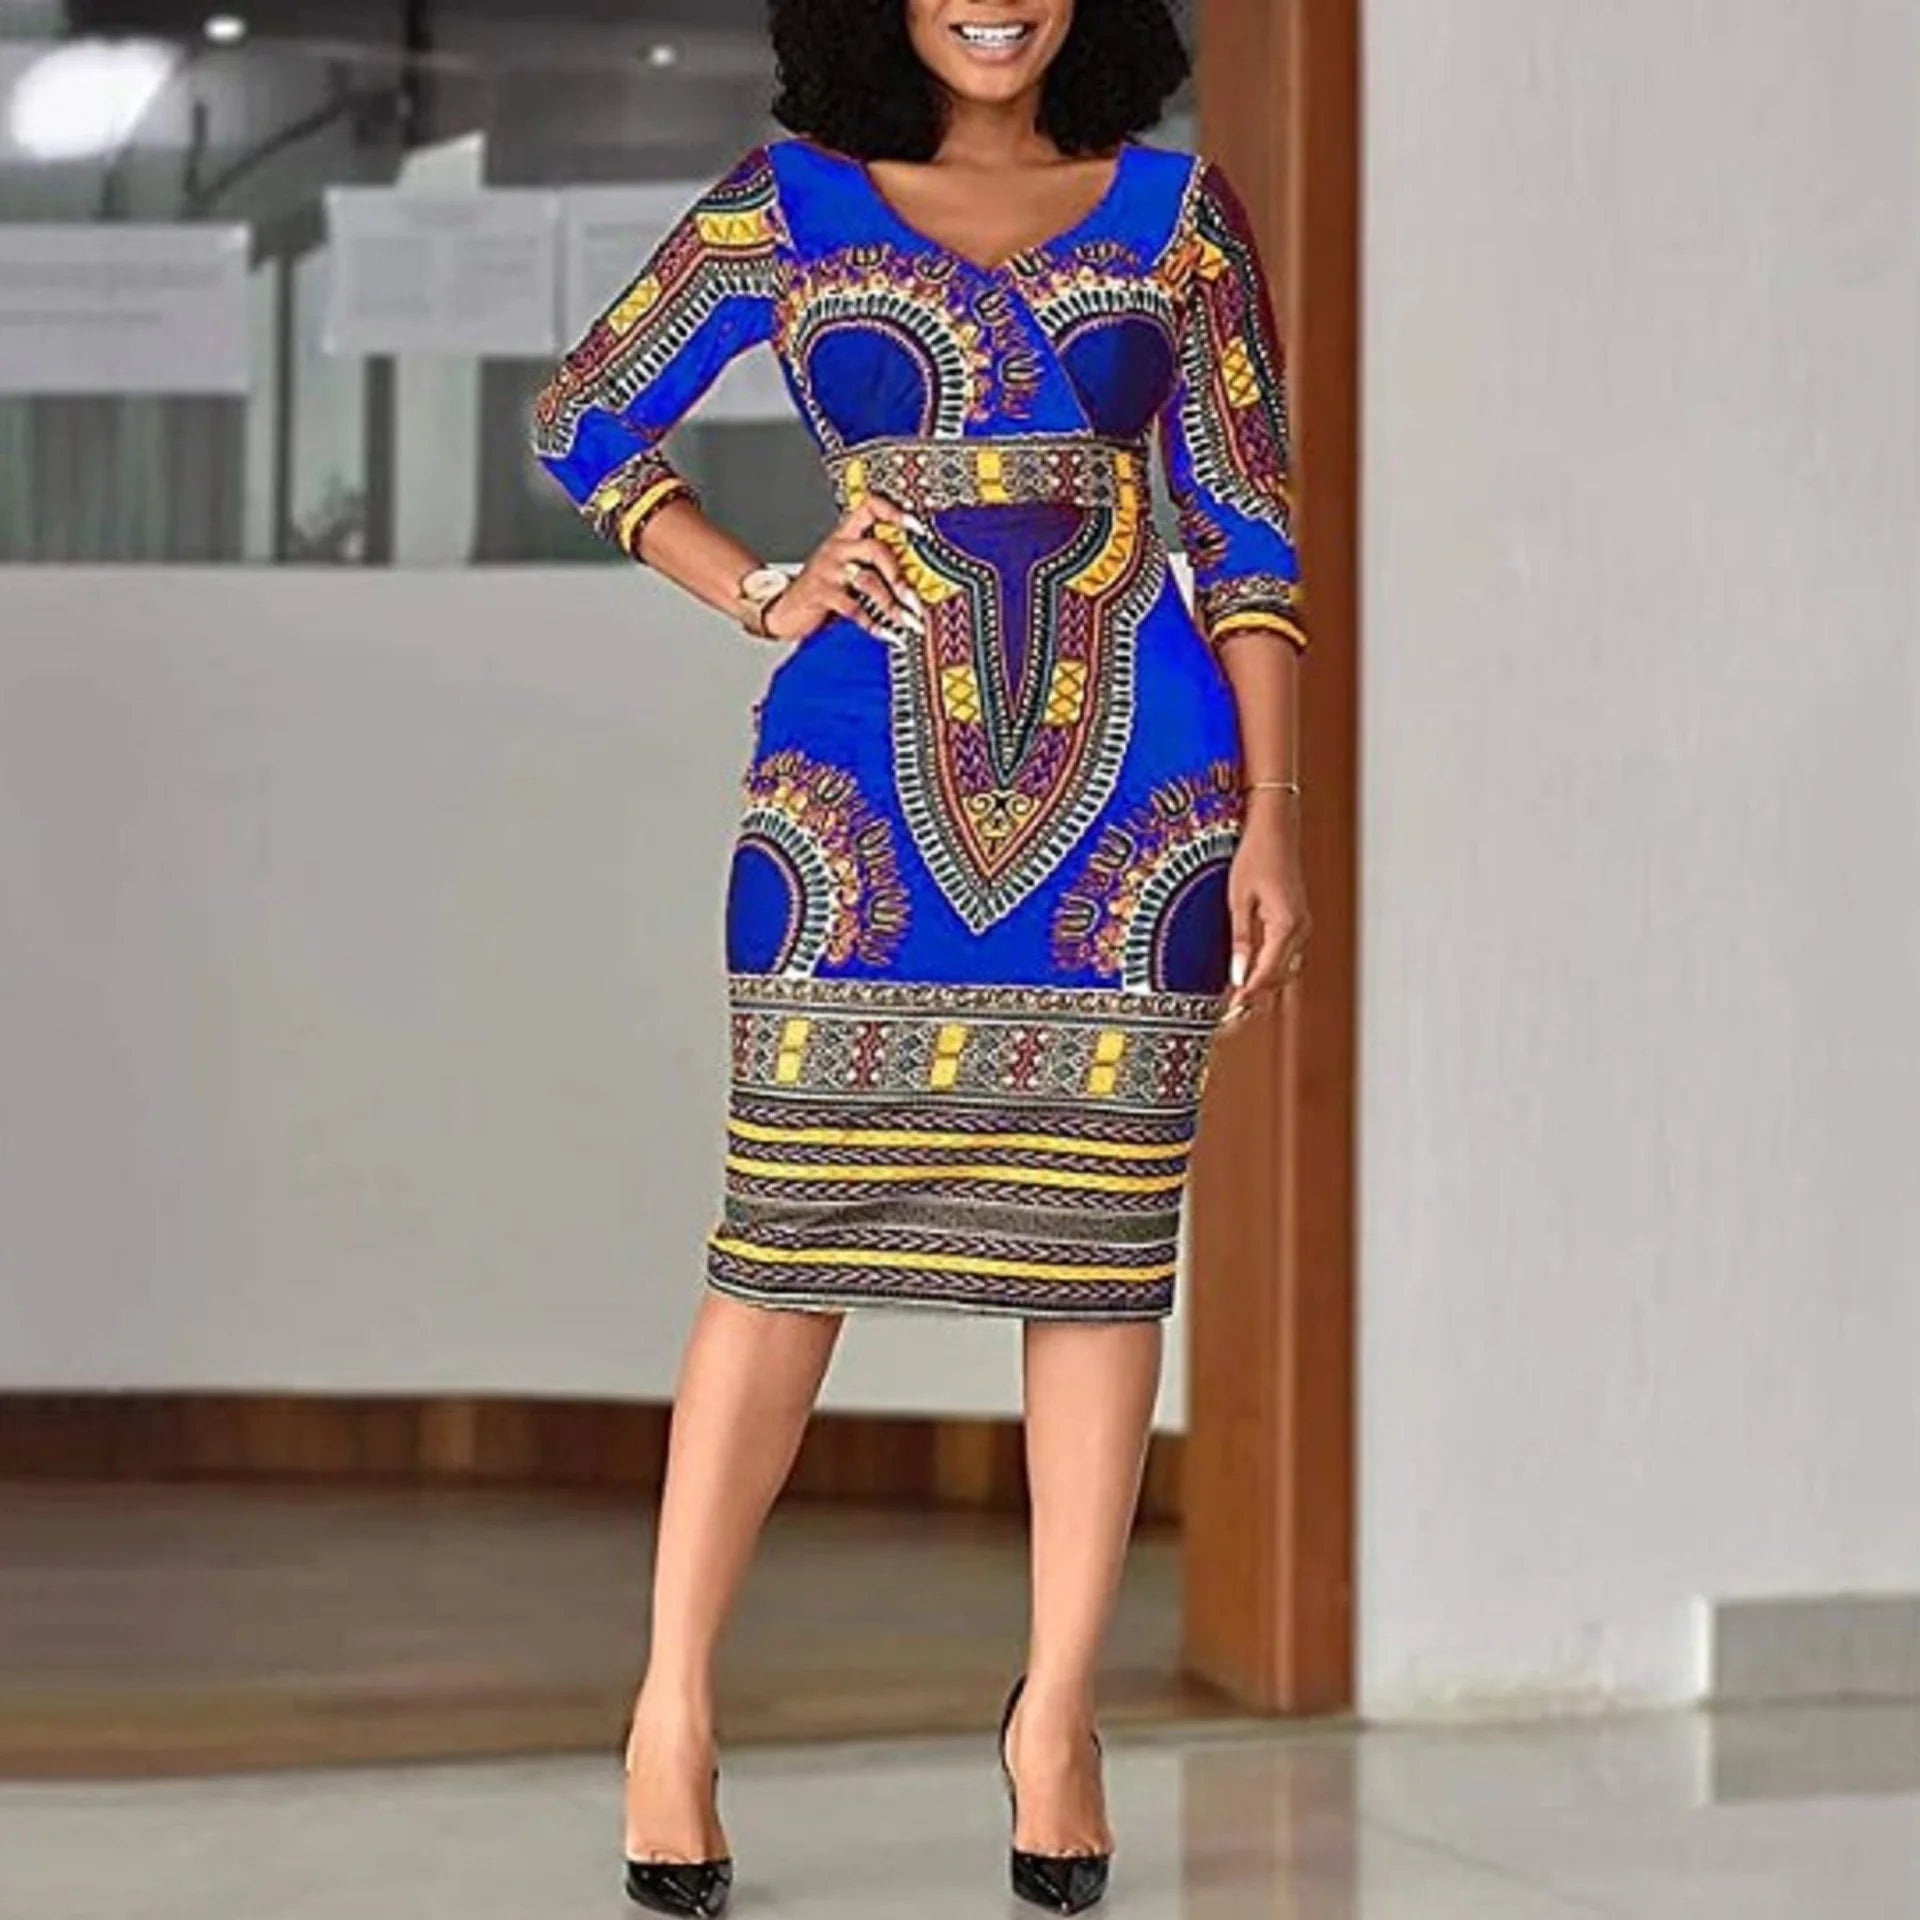 Ethnic Print V-neck Dress: Stylish Package Hip Skirt with A-line Silhouette - Women's Fashion - Flexi Africa - Flexi Africa offers Free Delivery Worldwide - Vibrant African traditional clothing showcasing bold prints and intricate designs